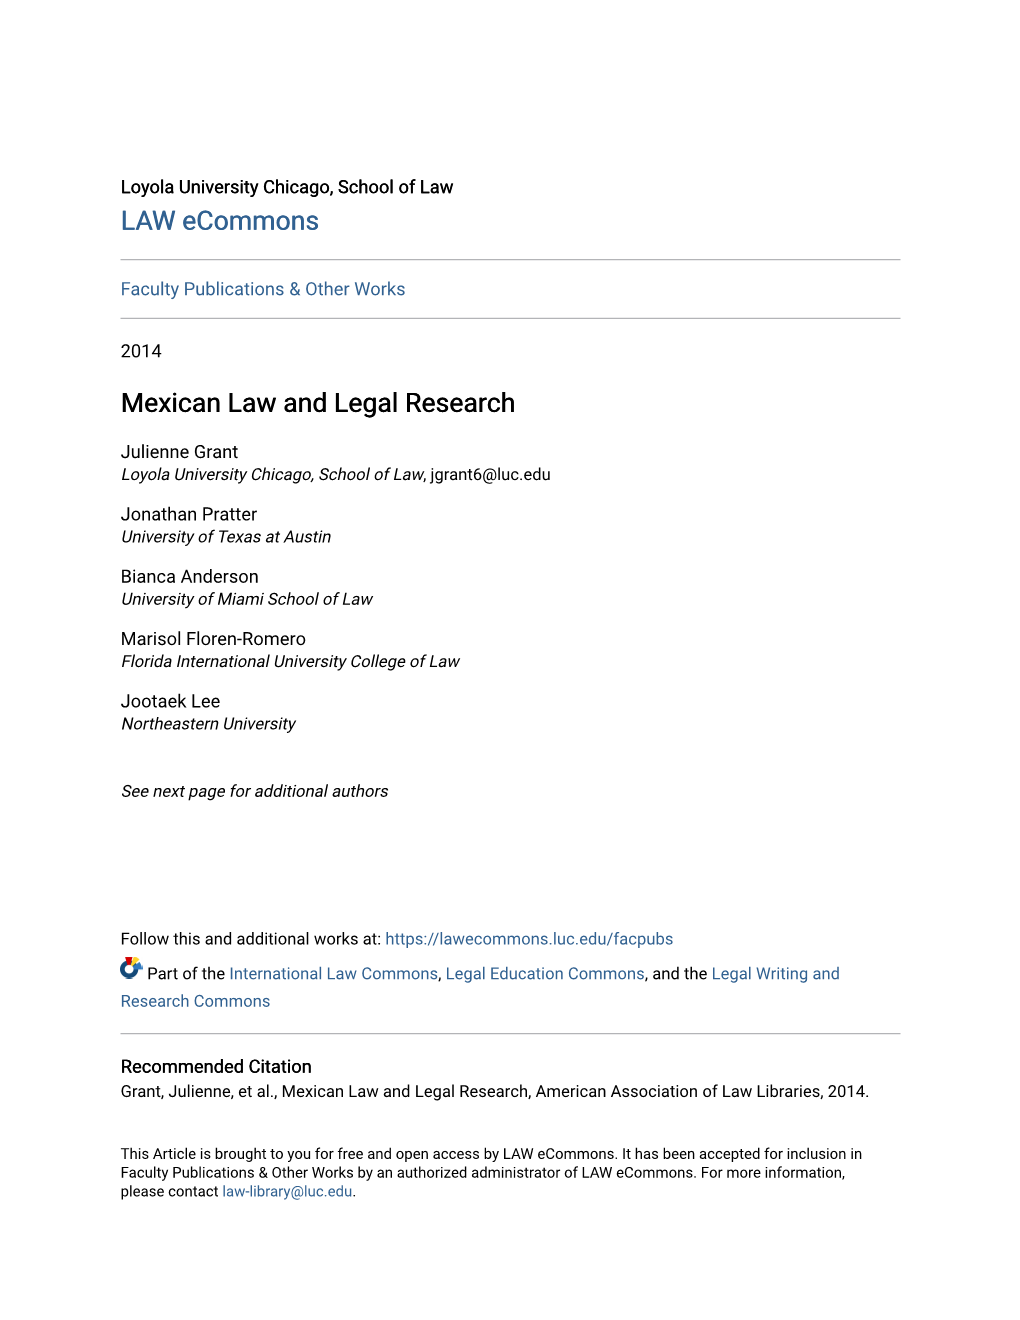 Mexican Law and Legal Research